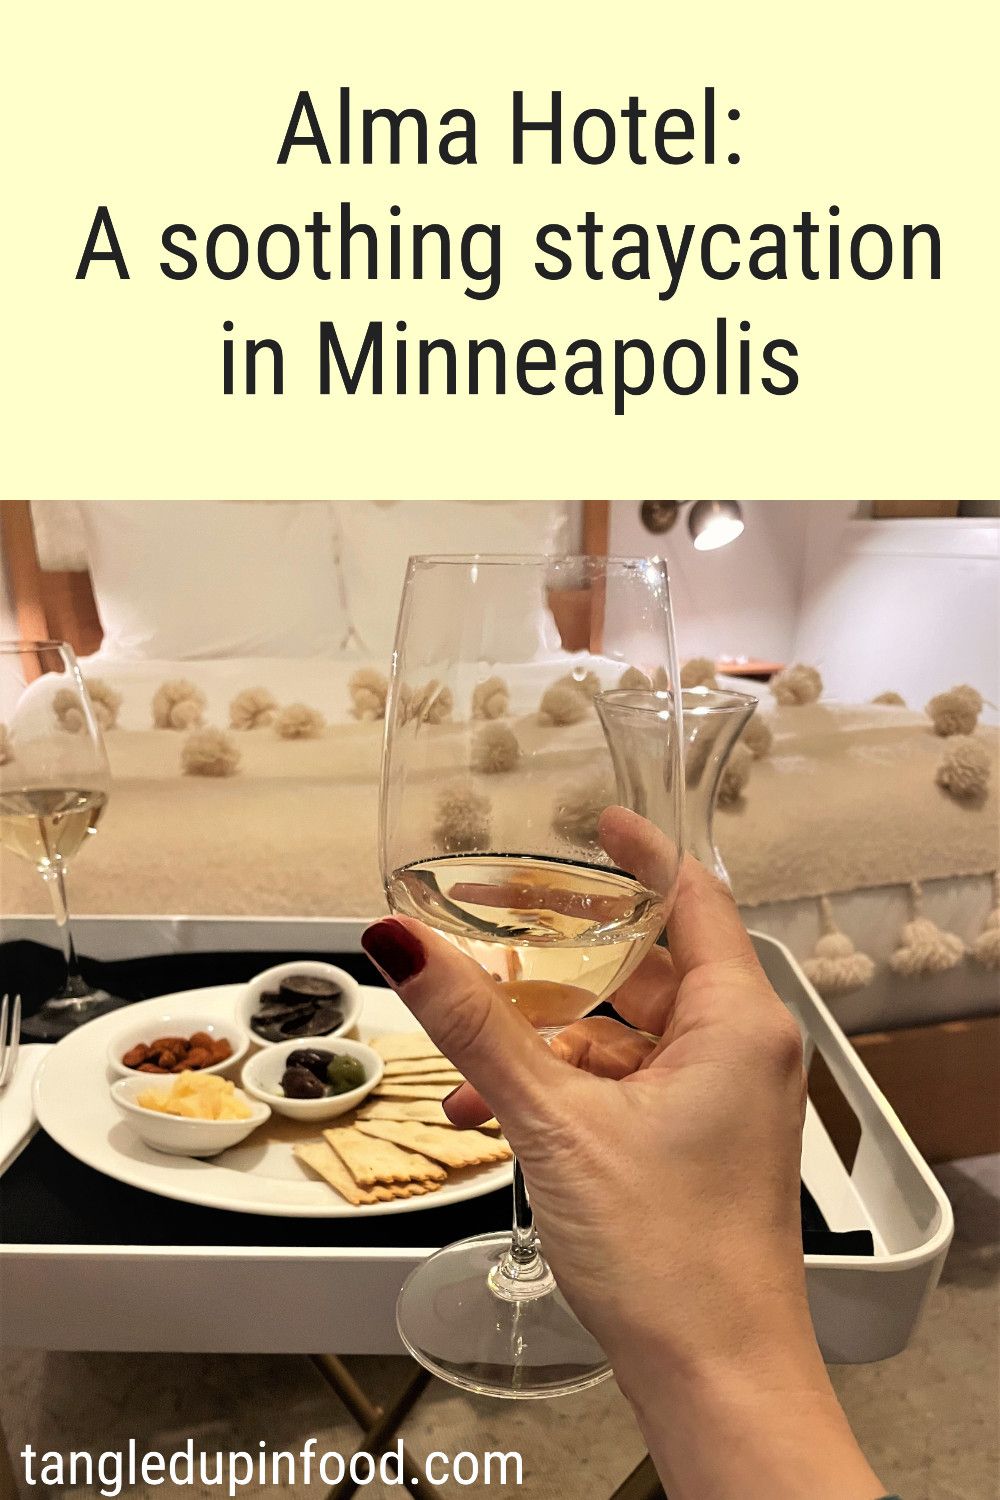 Hand holding a glass of white wine with a tray of antipasti and a hotel bed in the background with text reading "Alma Hotel: A soothing staycation in Minneapolis"